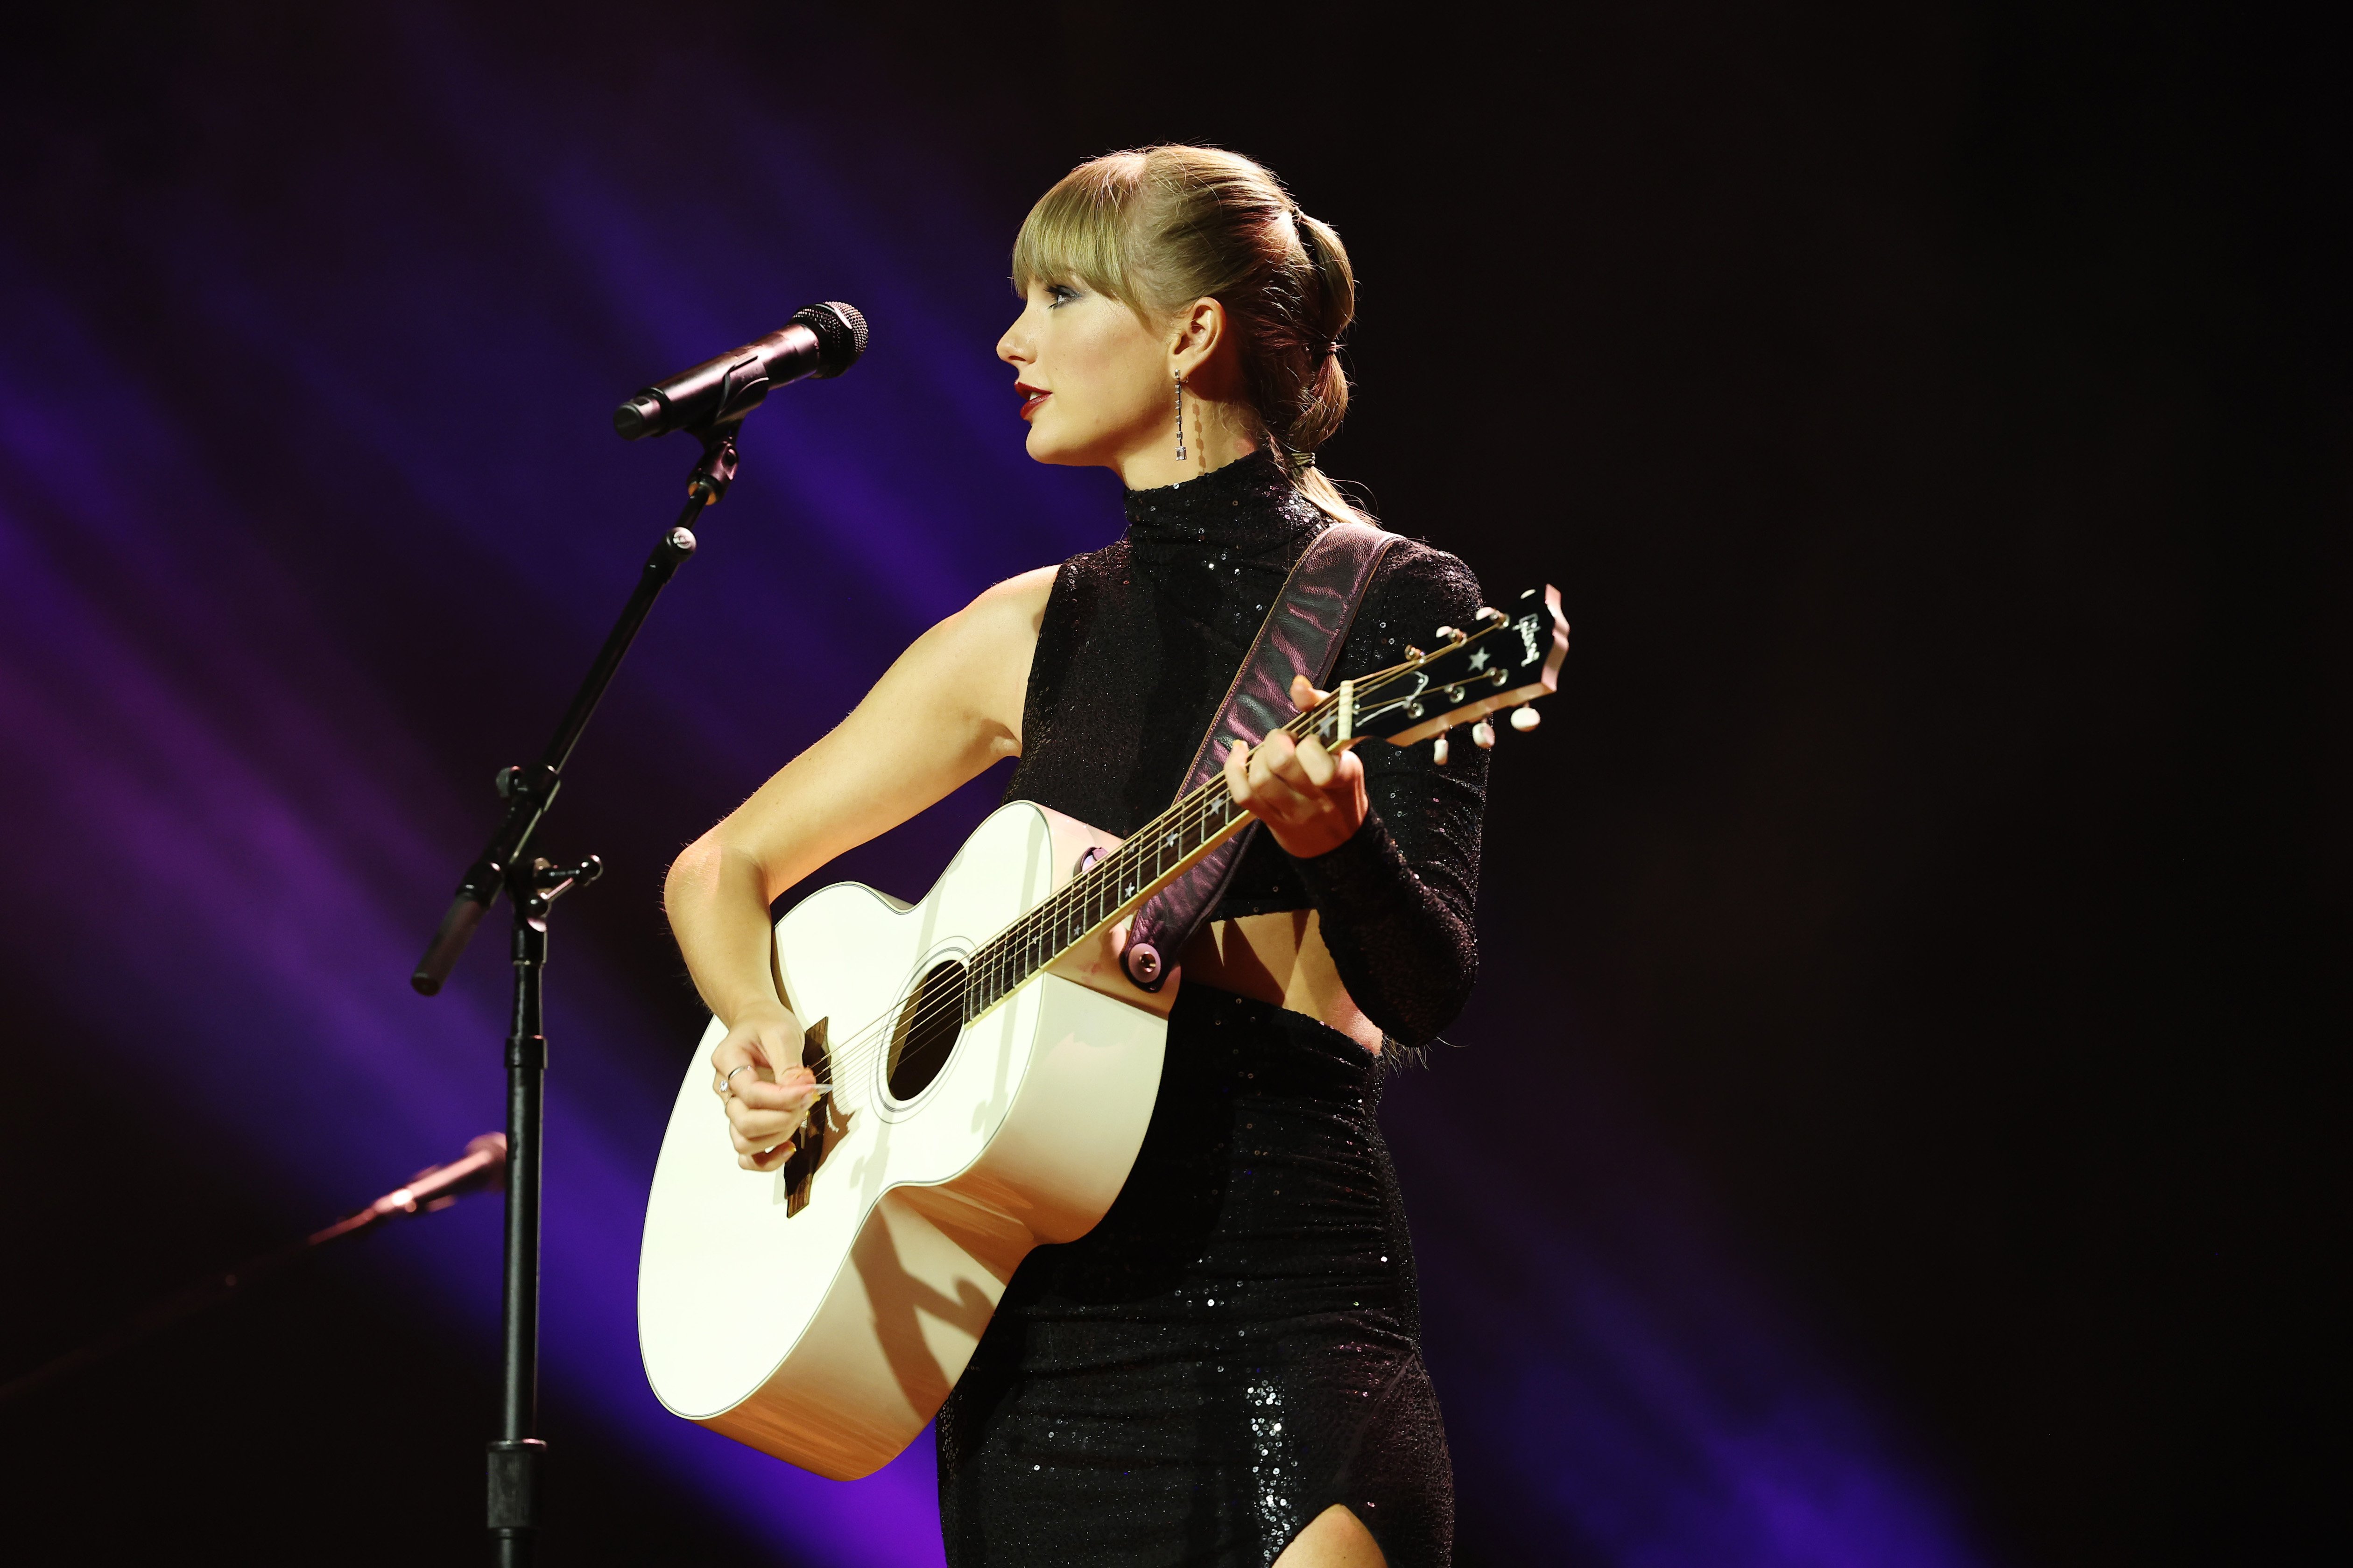 Taylor Swift performs 'All Too Well' (10 minute version) during NSAI 2022 Nashville Songwriter Awards